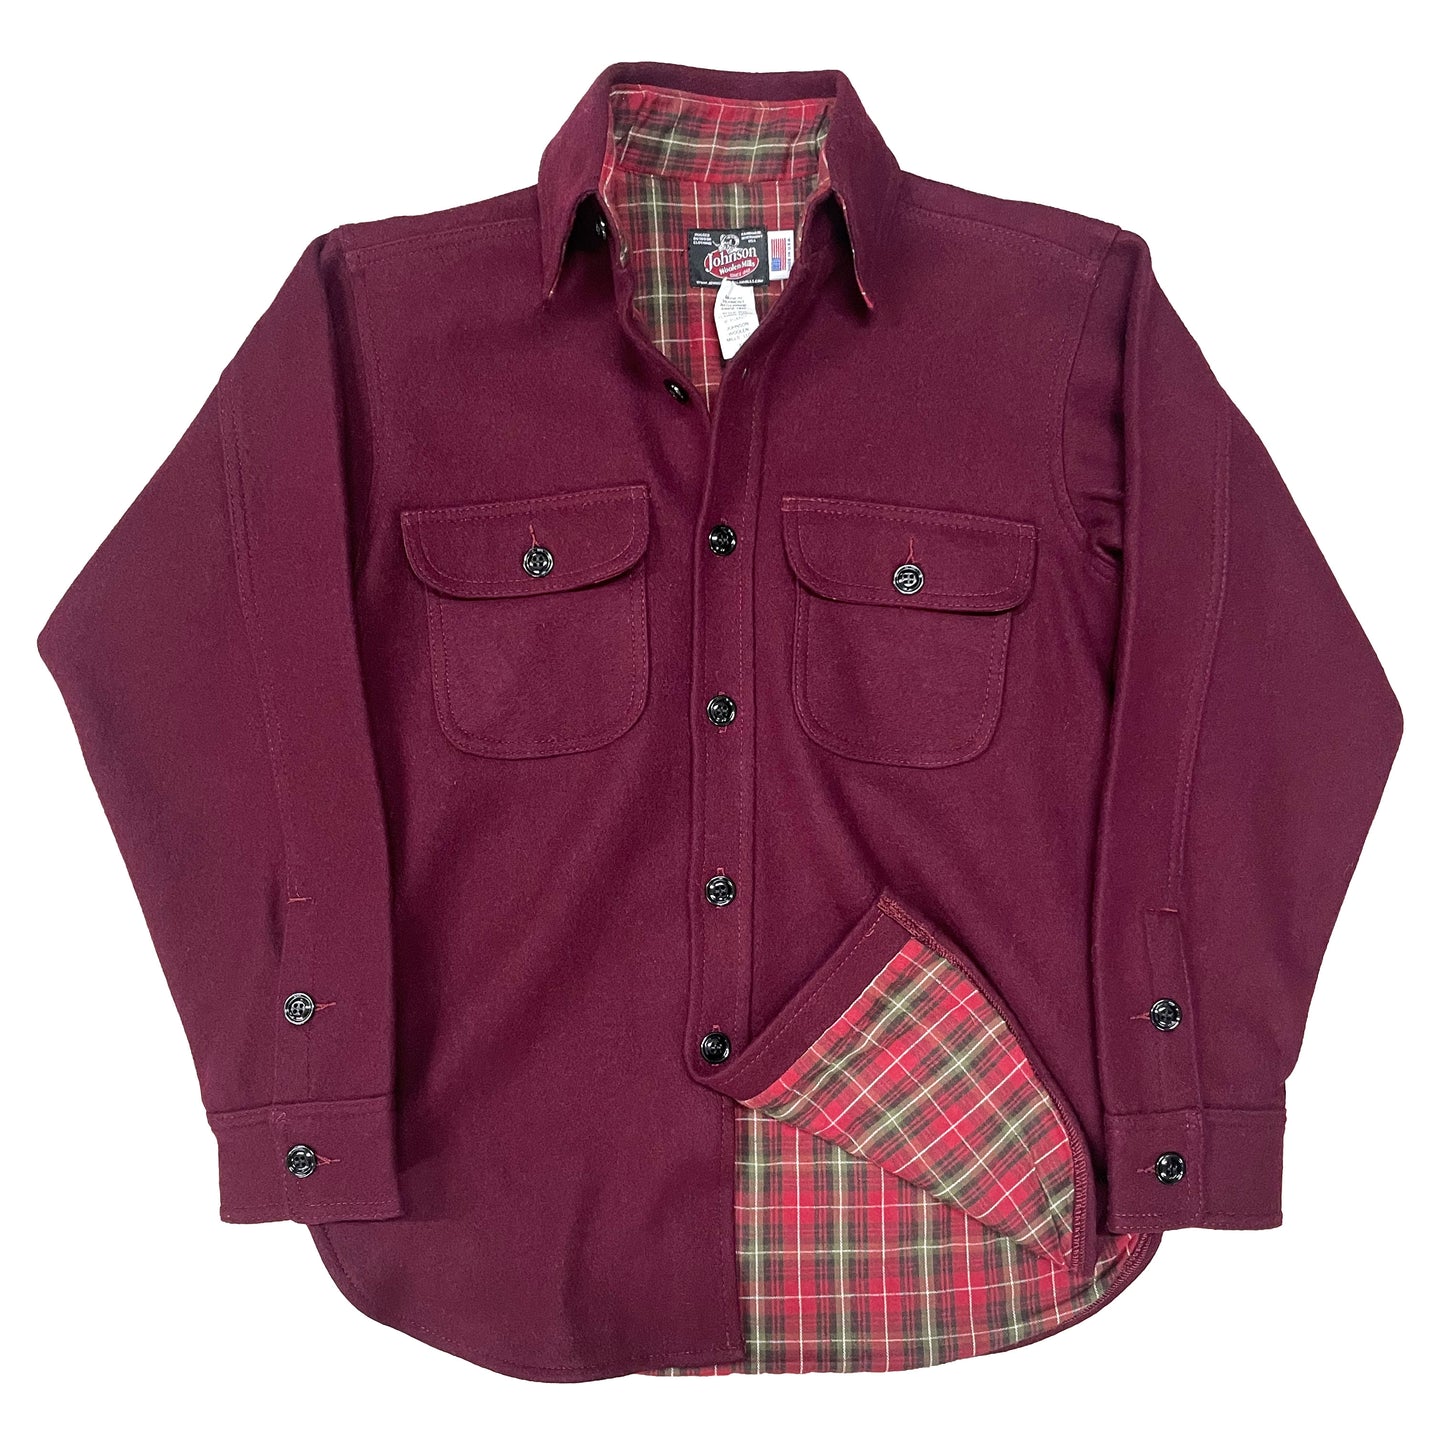 Long Tail Button Down long sleeve shirt with a 6 button front, button cuffs and two front chest pockets. Shown in burgundy with burgundy,red, white and green plaid flannel lining.